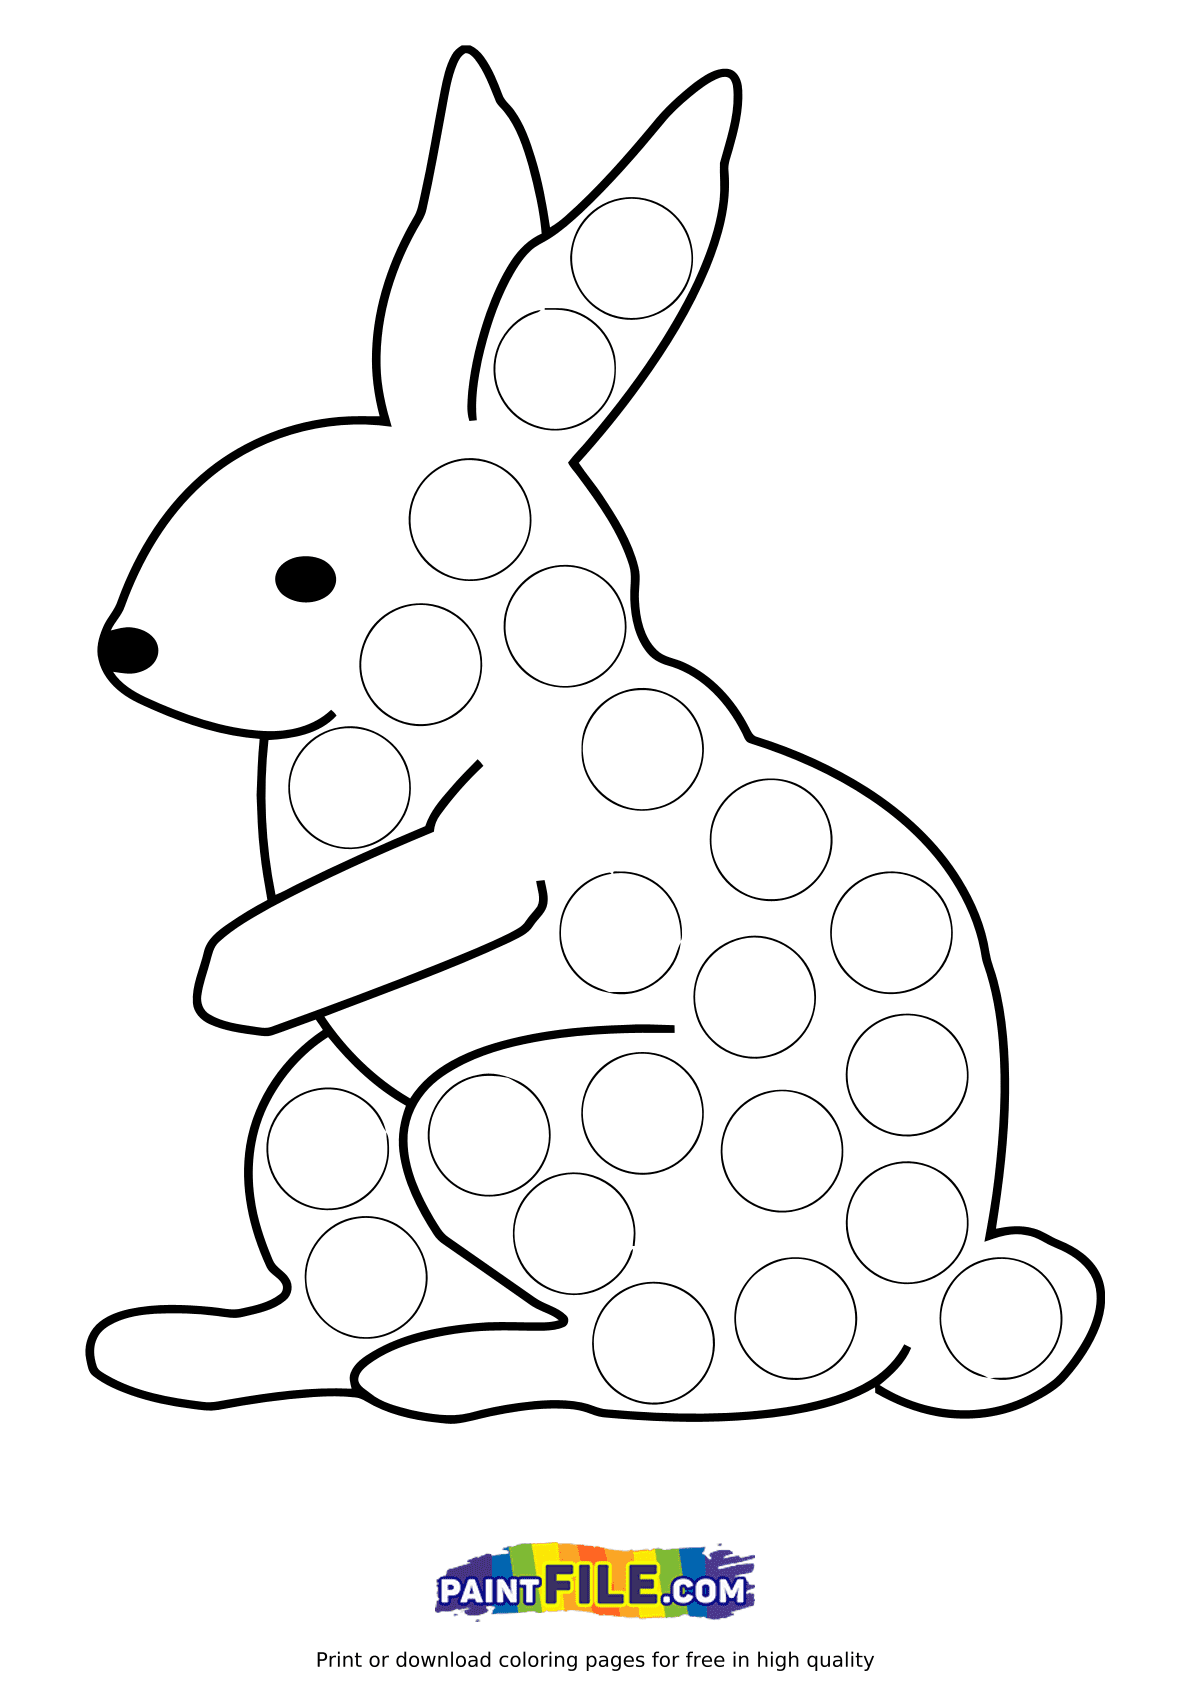 Pop it Forest Bunny Coloring Pages